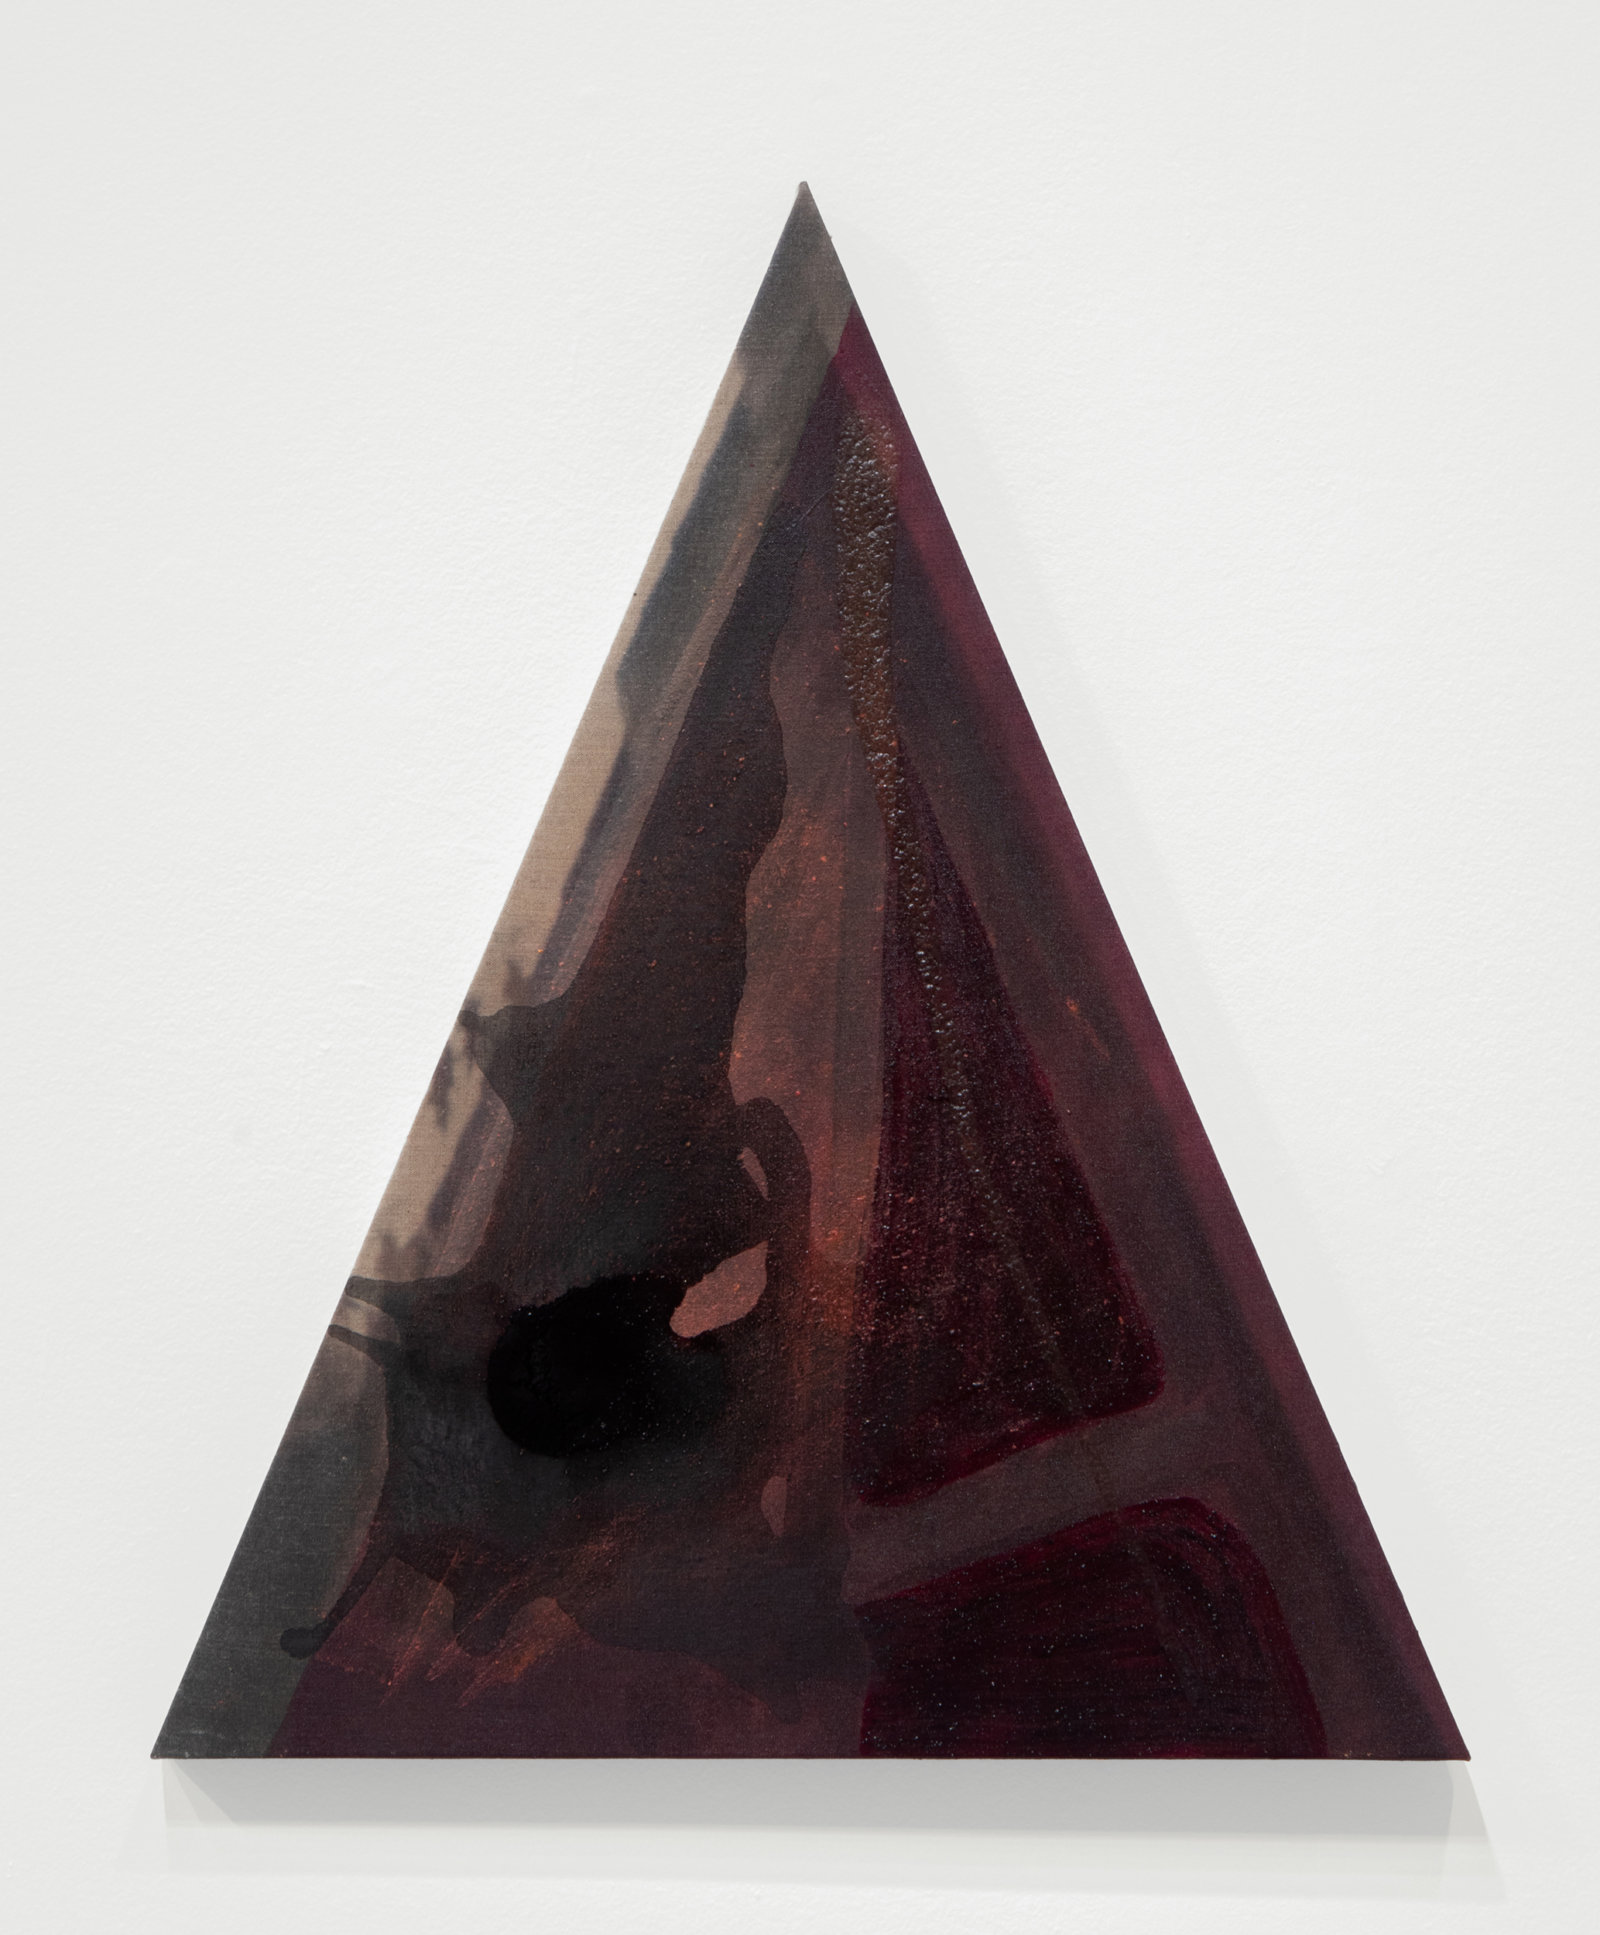 Duane Linklater, they have piled the stone / as they promised / without syrup 1, 2023, digital print on linen, cochineal, tea, sumac, charcoal, maple syrup, 36 x 30 in. (91 x 76 cm)